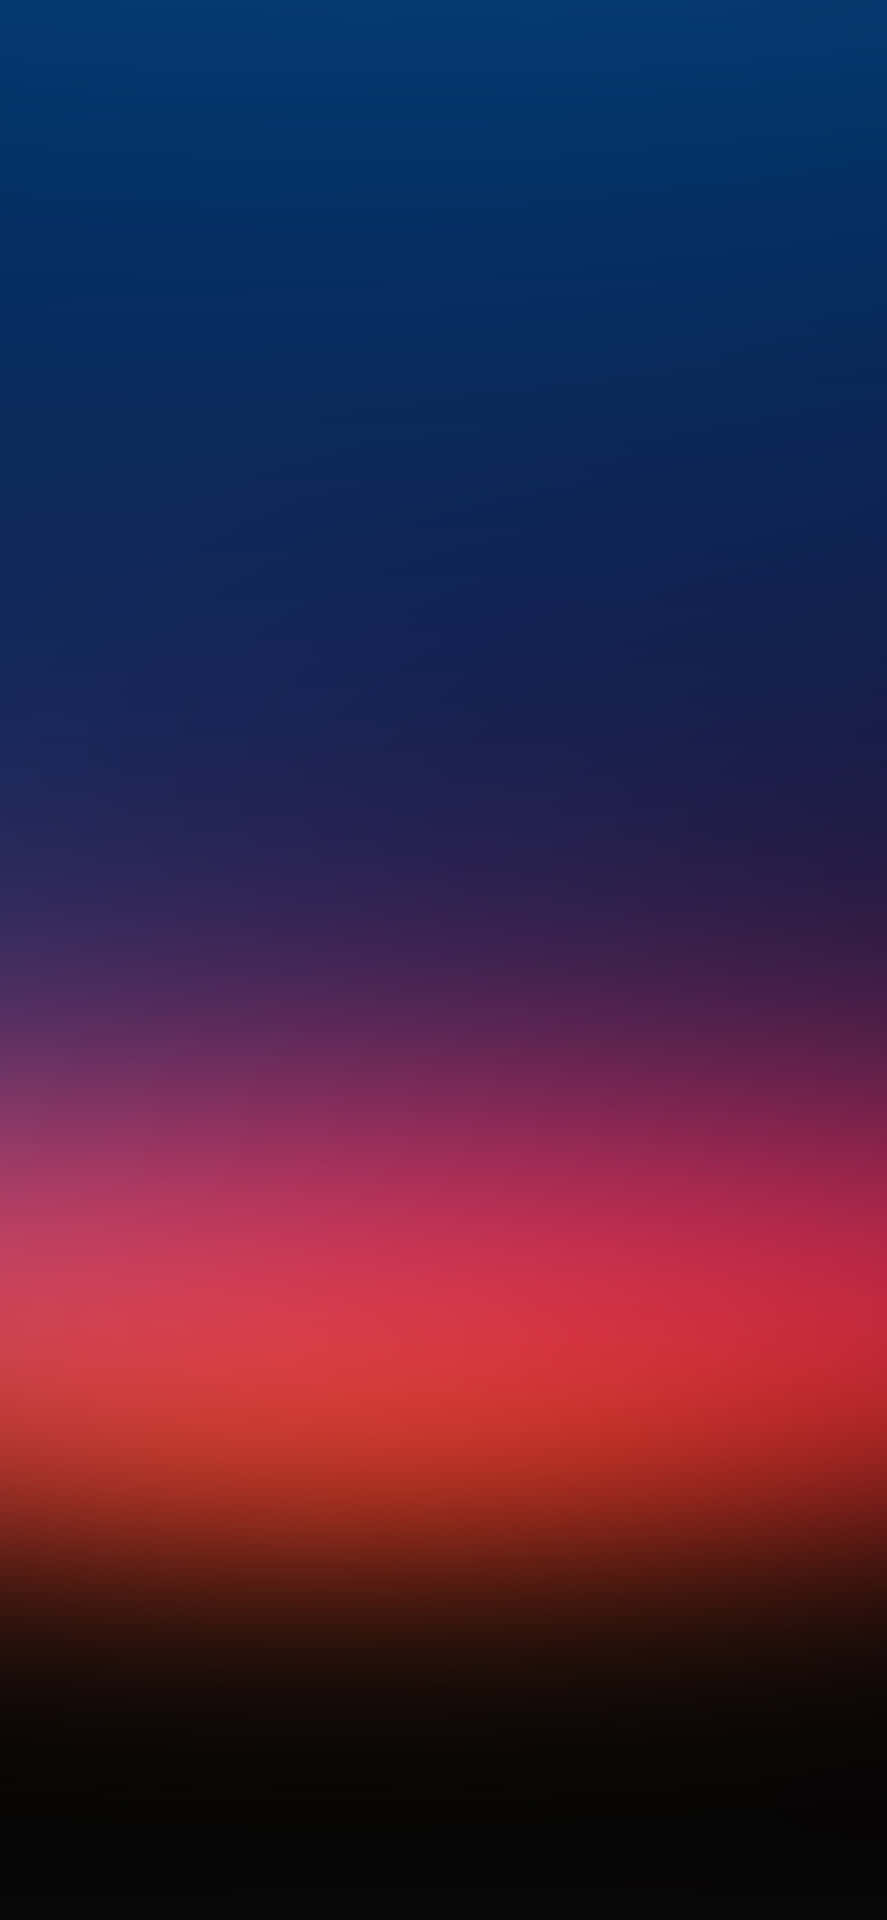 Unique Combination - The Red and Blue iPhone Wallpaper